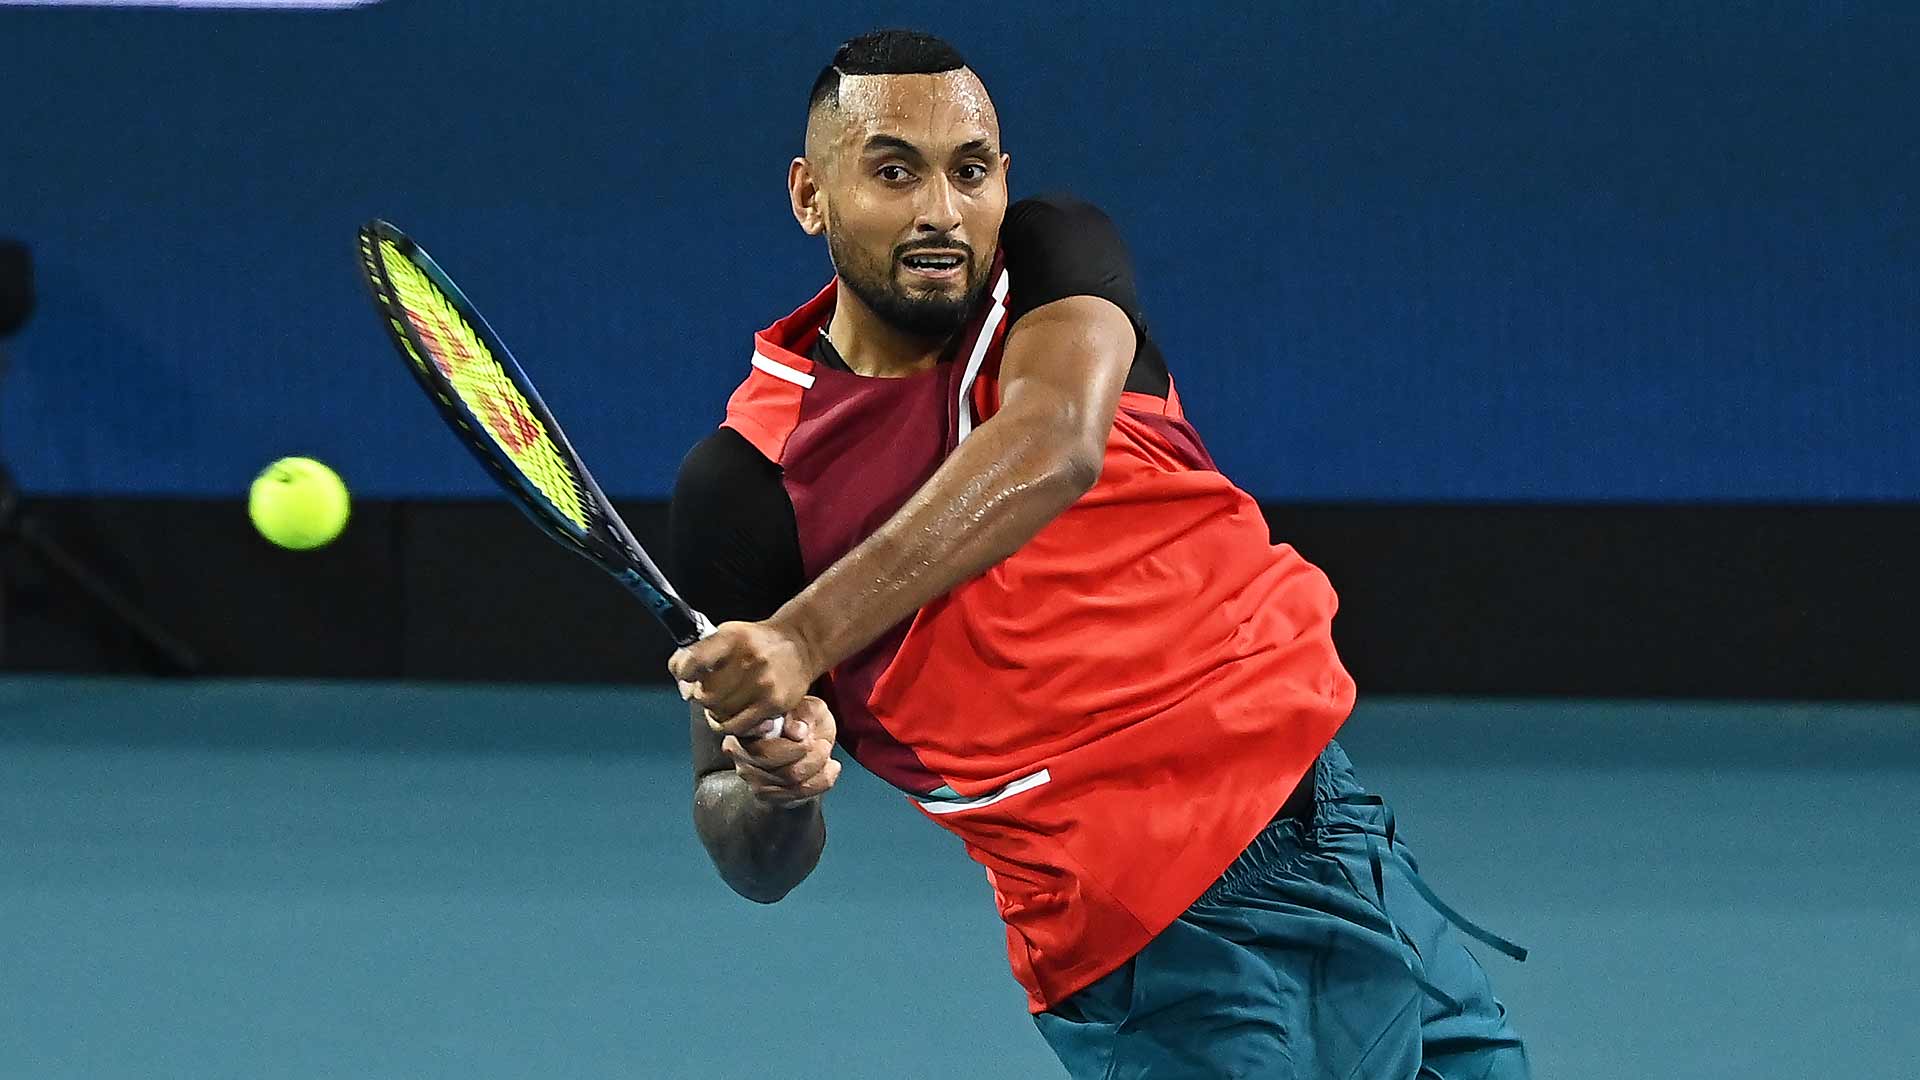 Nick Kyrgios en route to a first-round win over Adrian Mannarino in Miami.